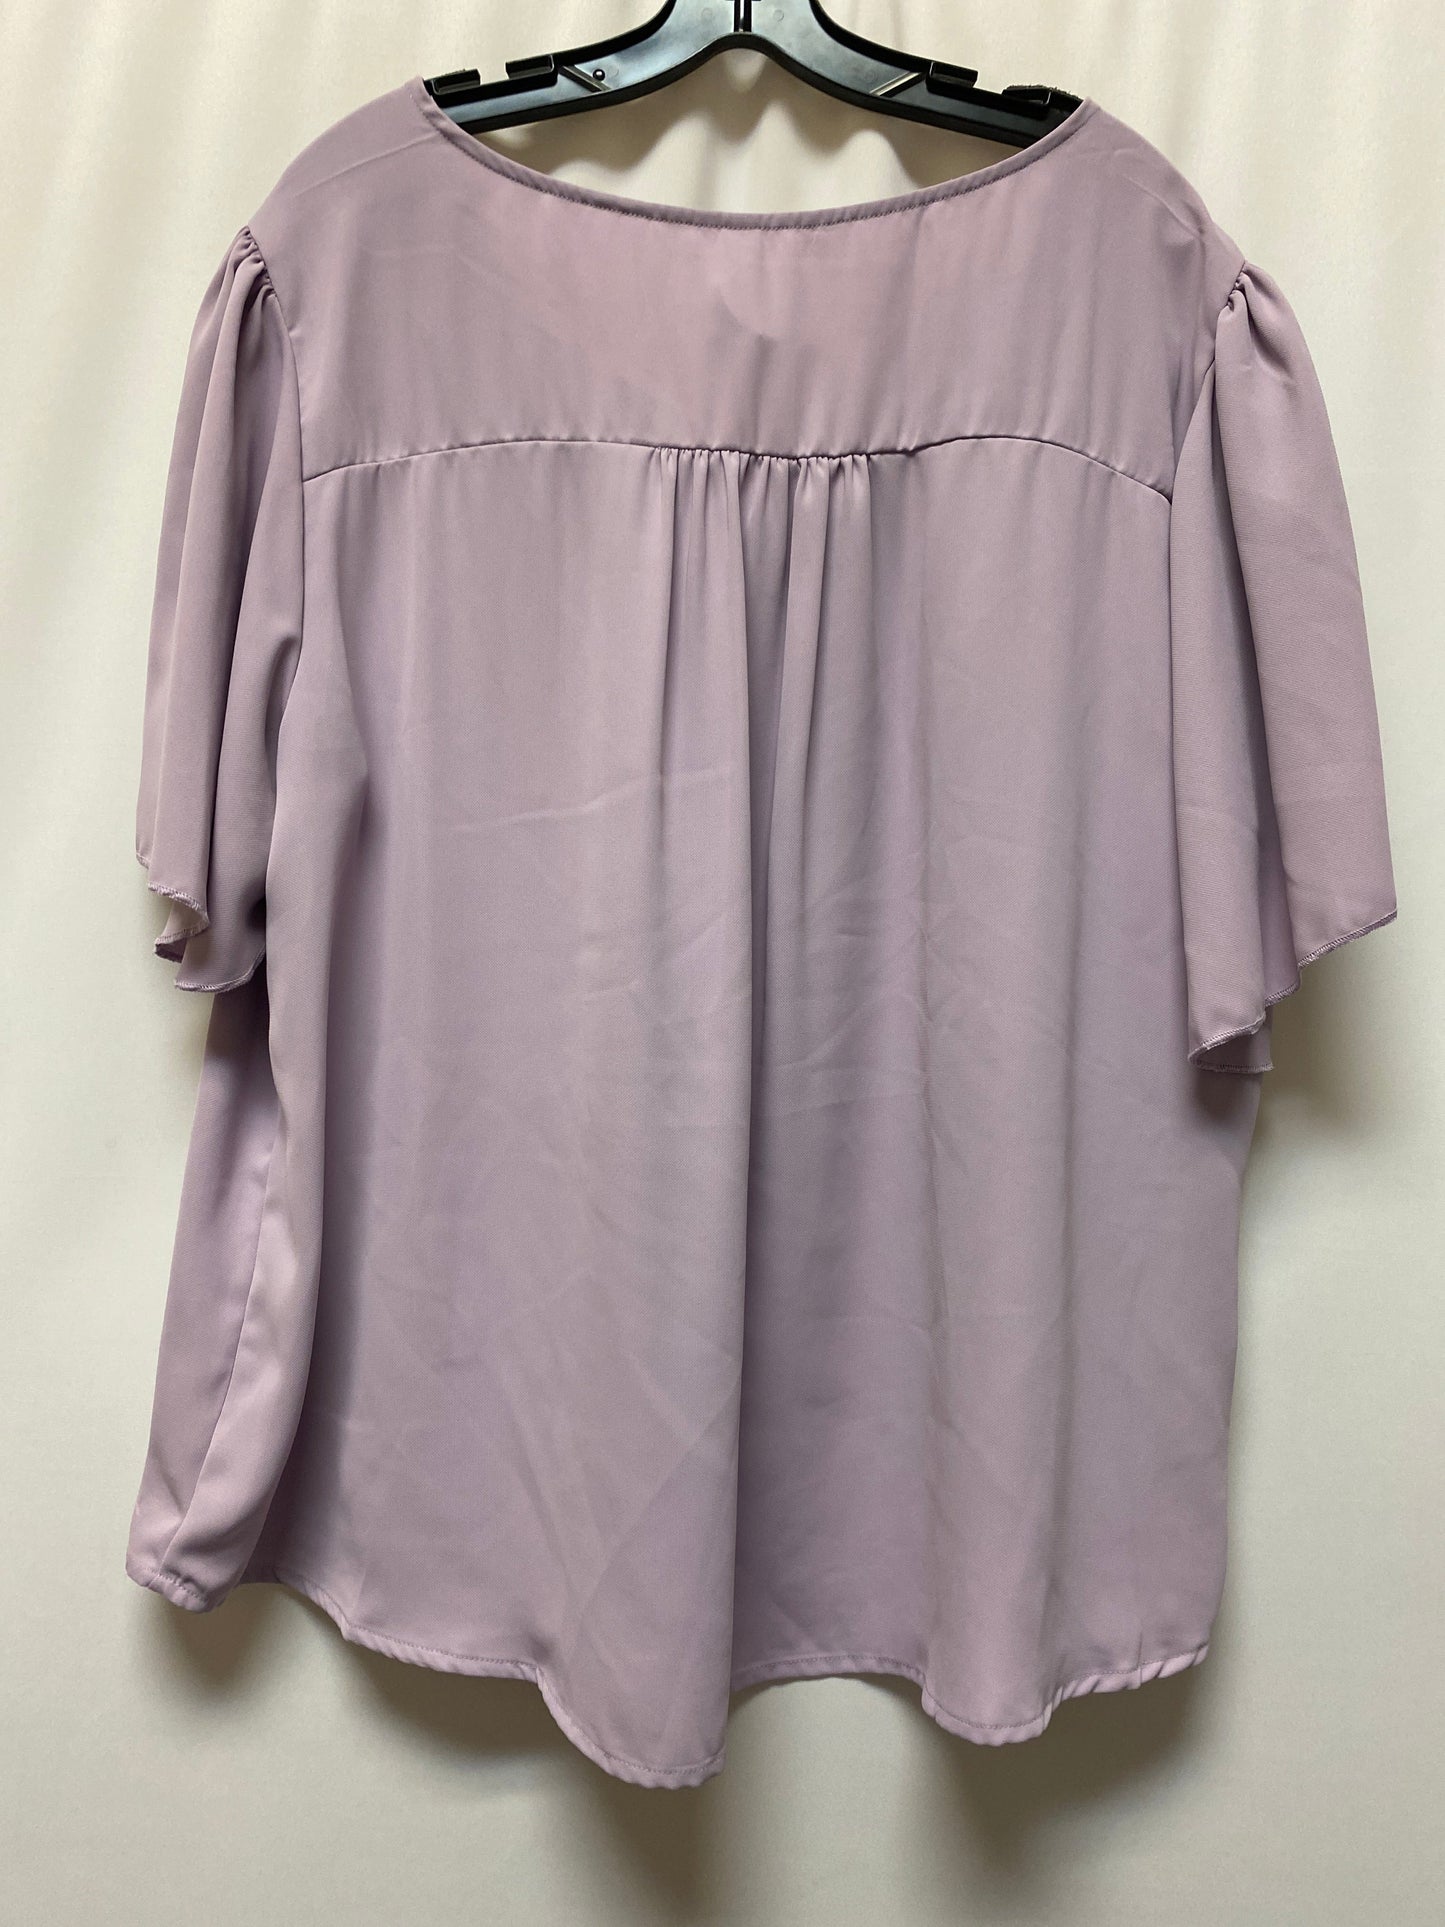 Purple Top Short Sleeve Zenana Outfitters, Size 3x